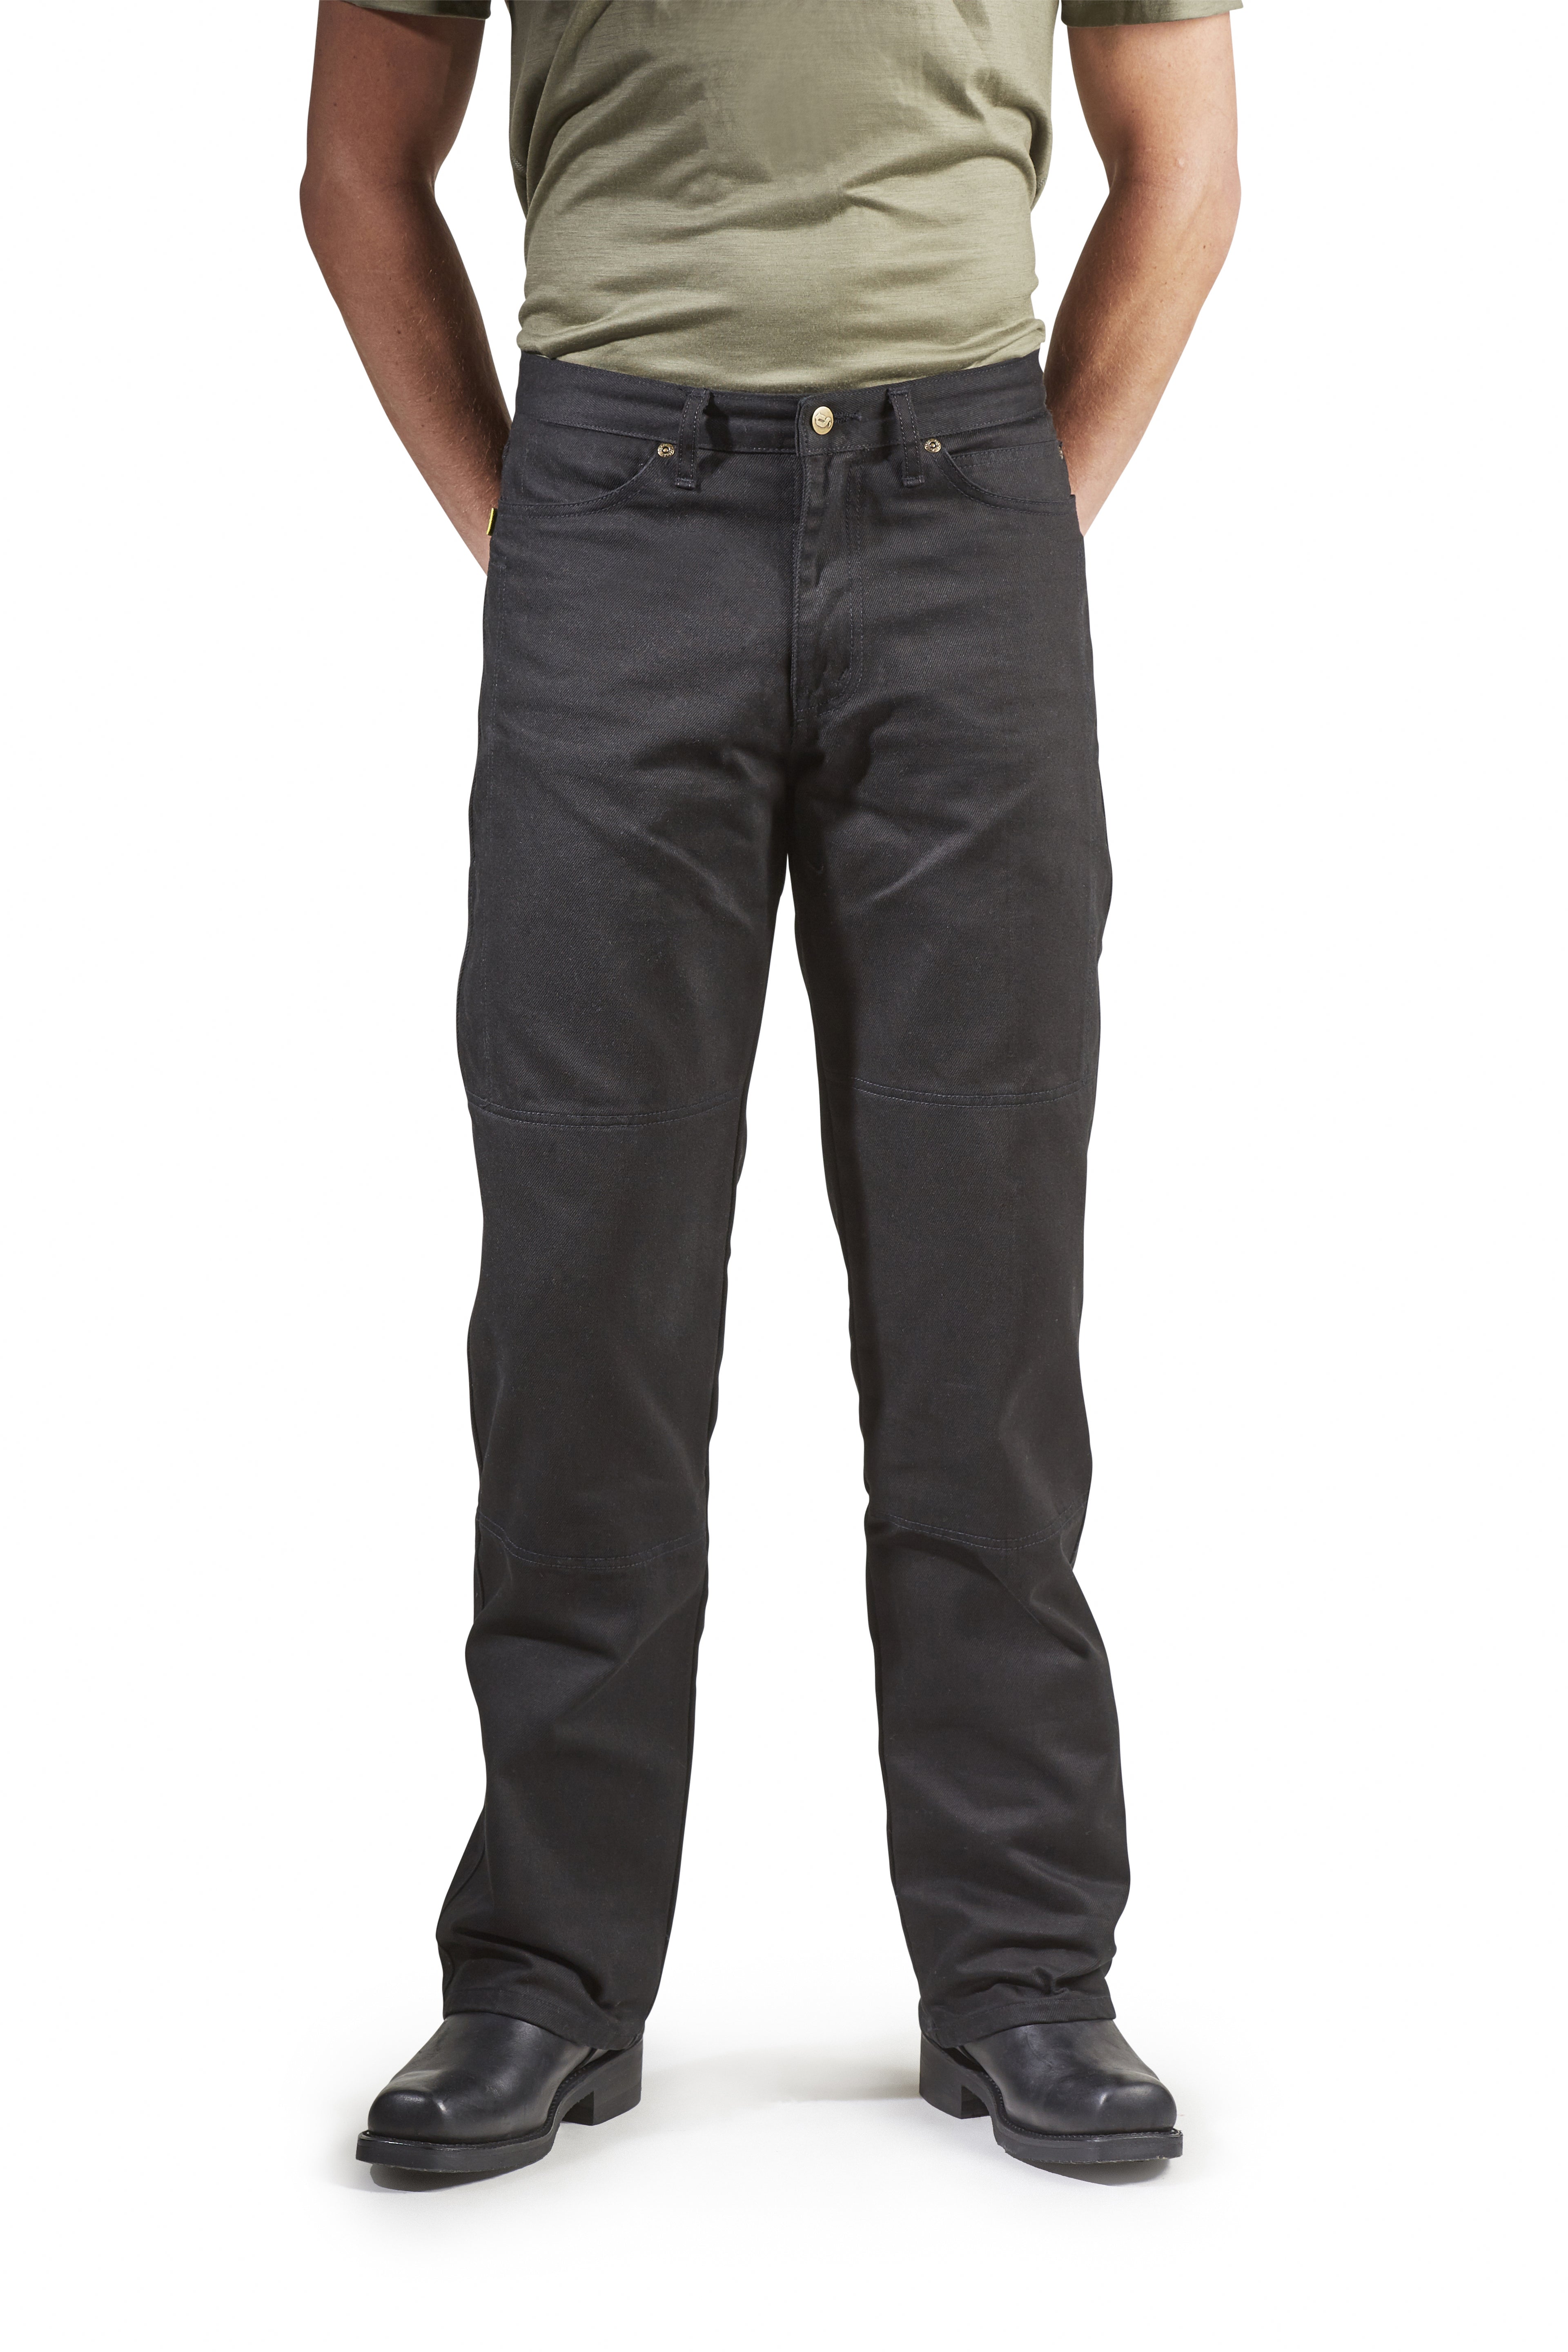 Jeans, Classic by Draggin Jeans | Black